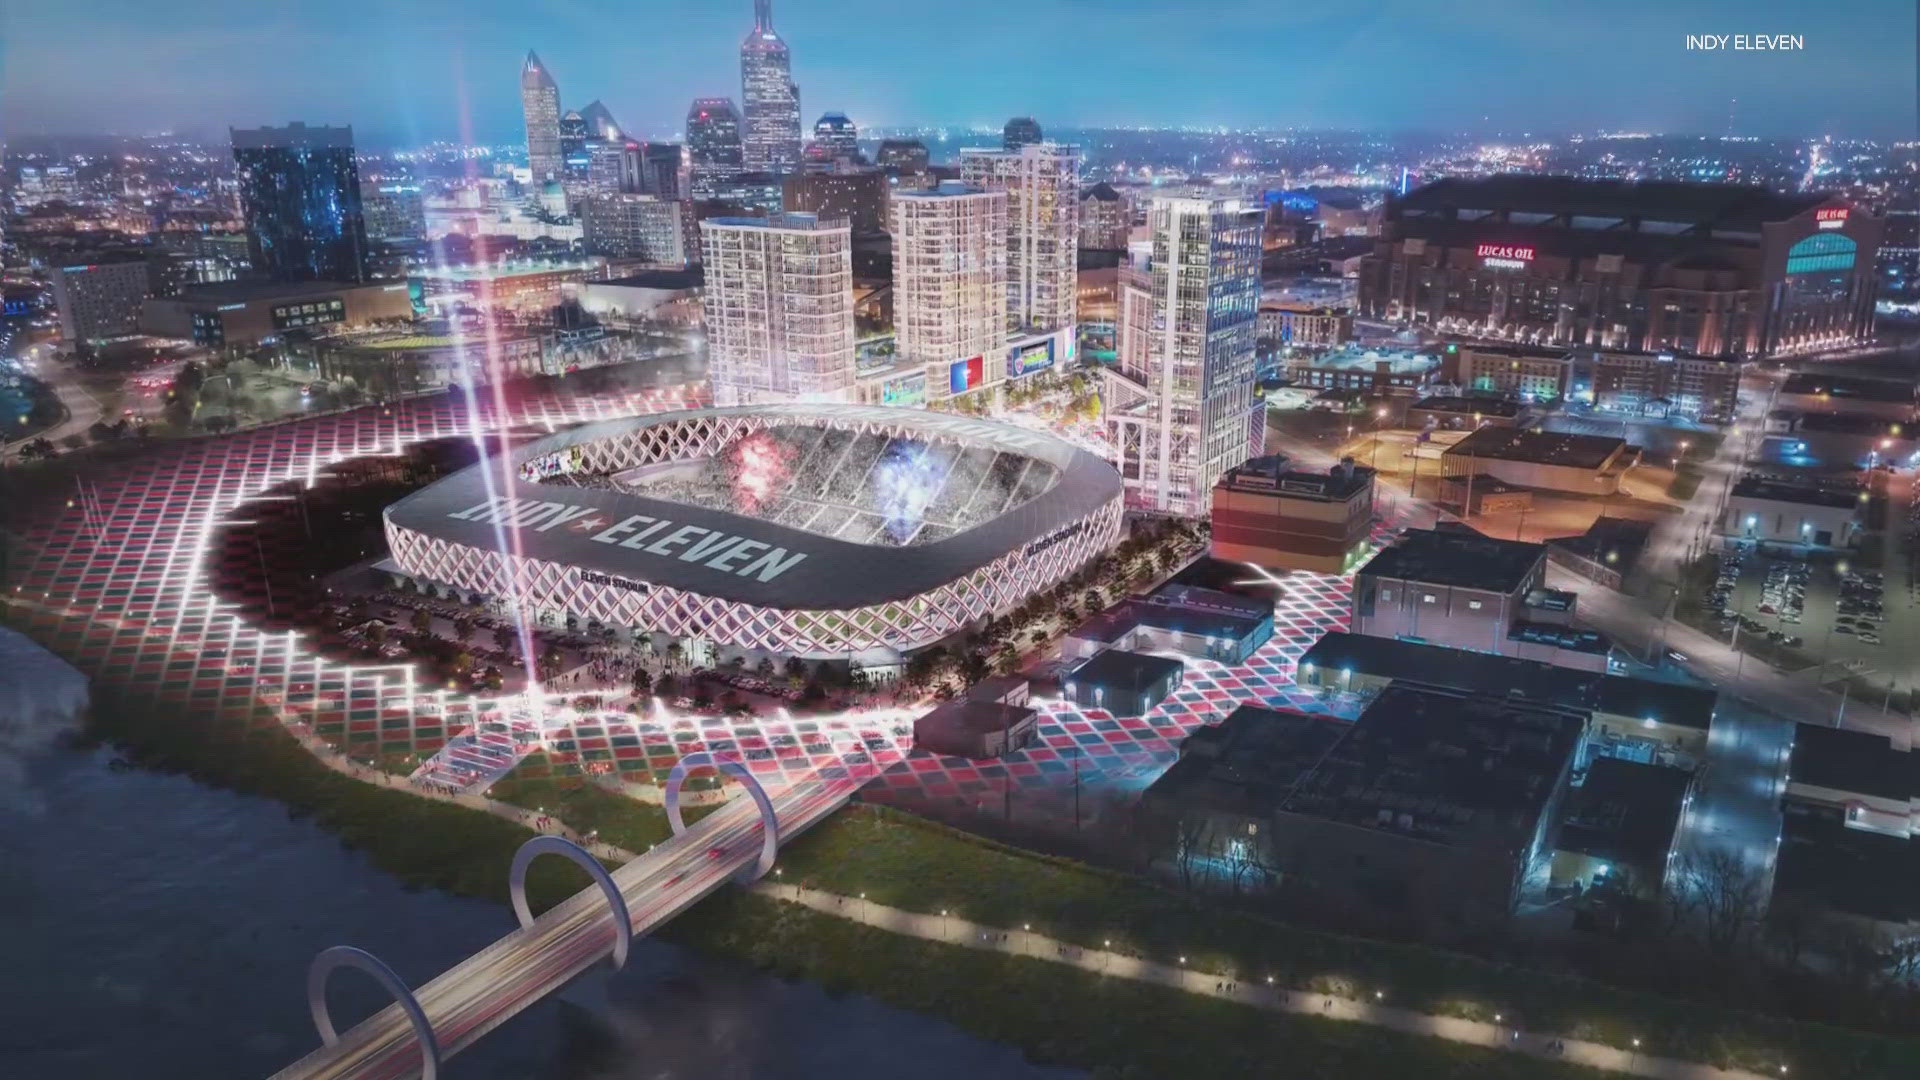 The city is no longer working with the developer to build the Indy Eleven soccer stadium because the city is looking at a new site for an expansion MLS team.